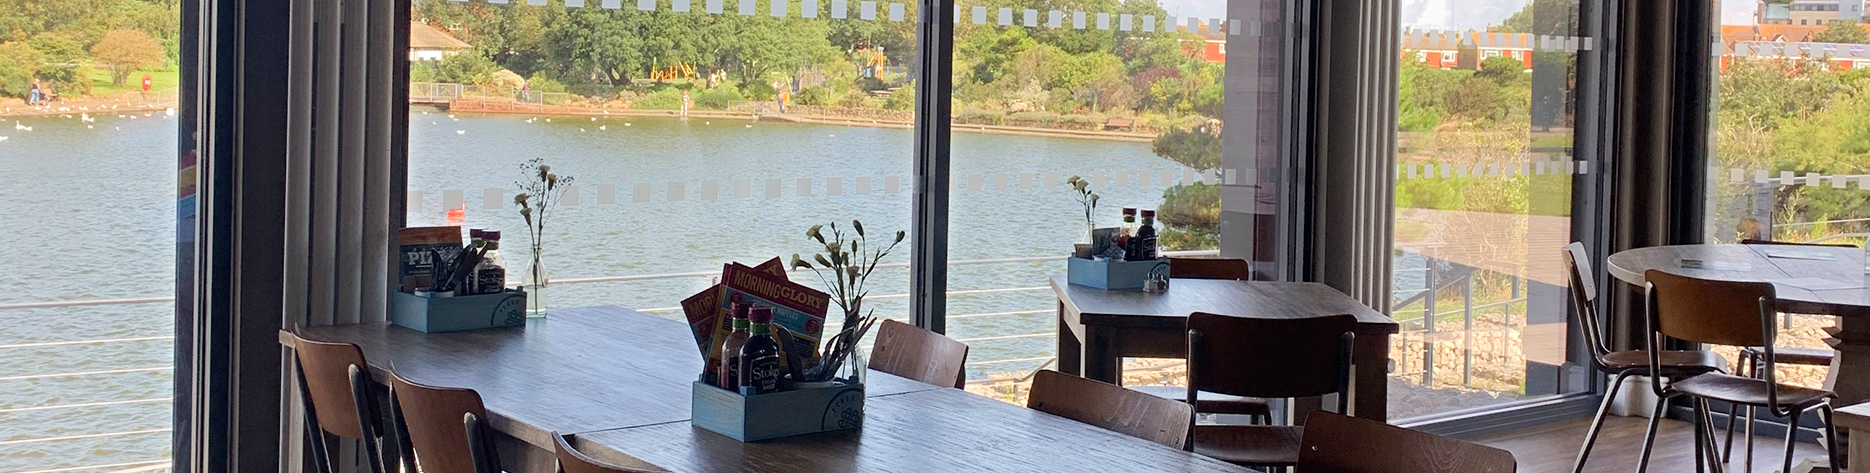 Tables at Princes Perch cafe in Eastbourne looking out onto the sunny lake in Princes Park